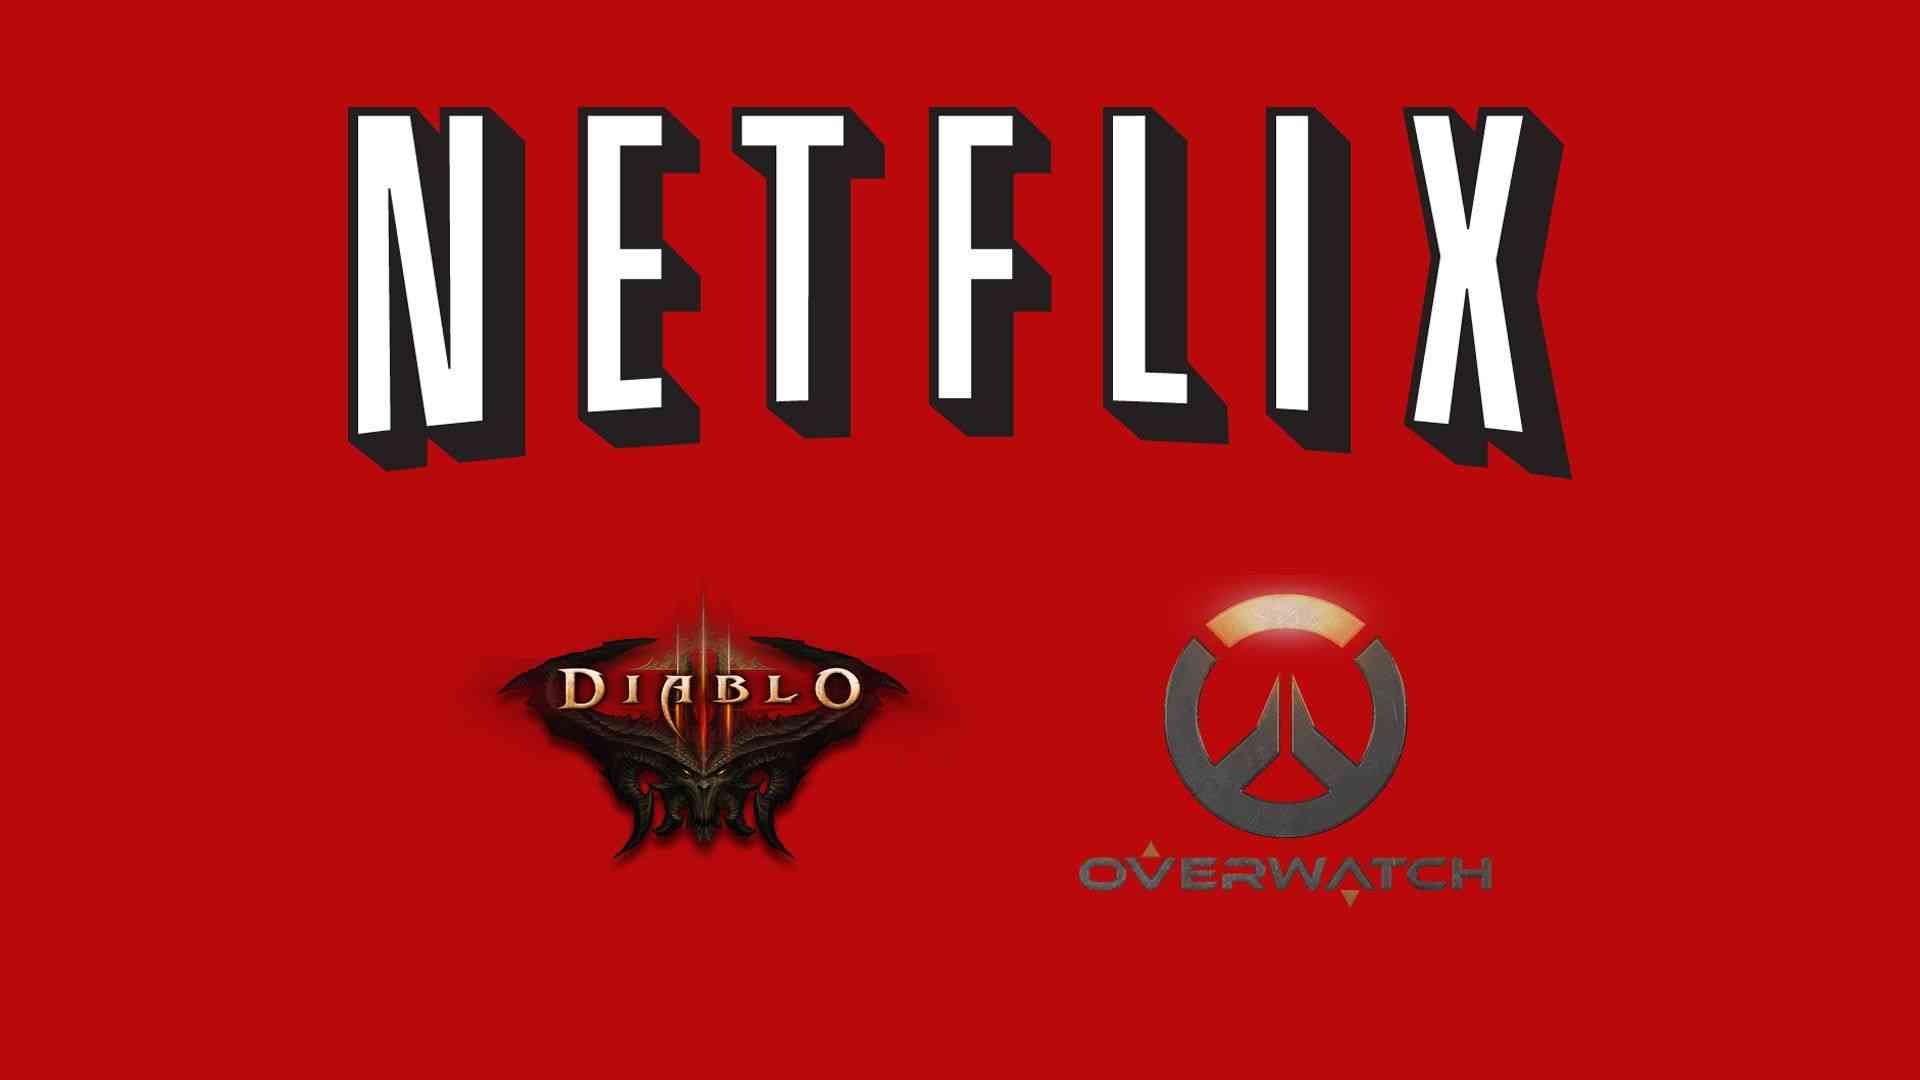 diablo and overwatch animations coming to netflix very soon 3862 big 1